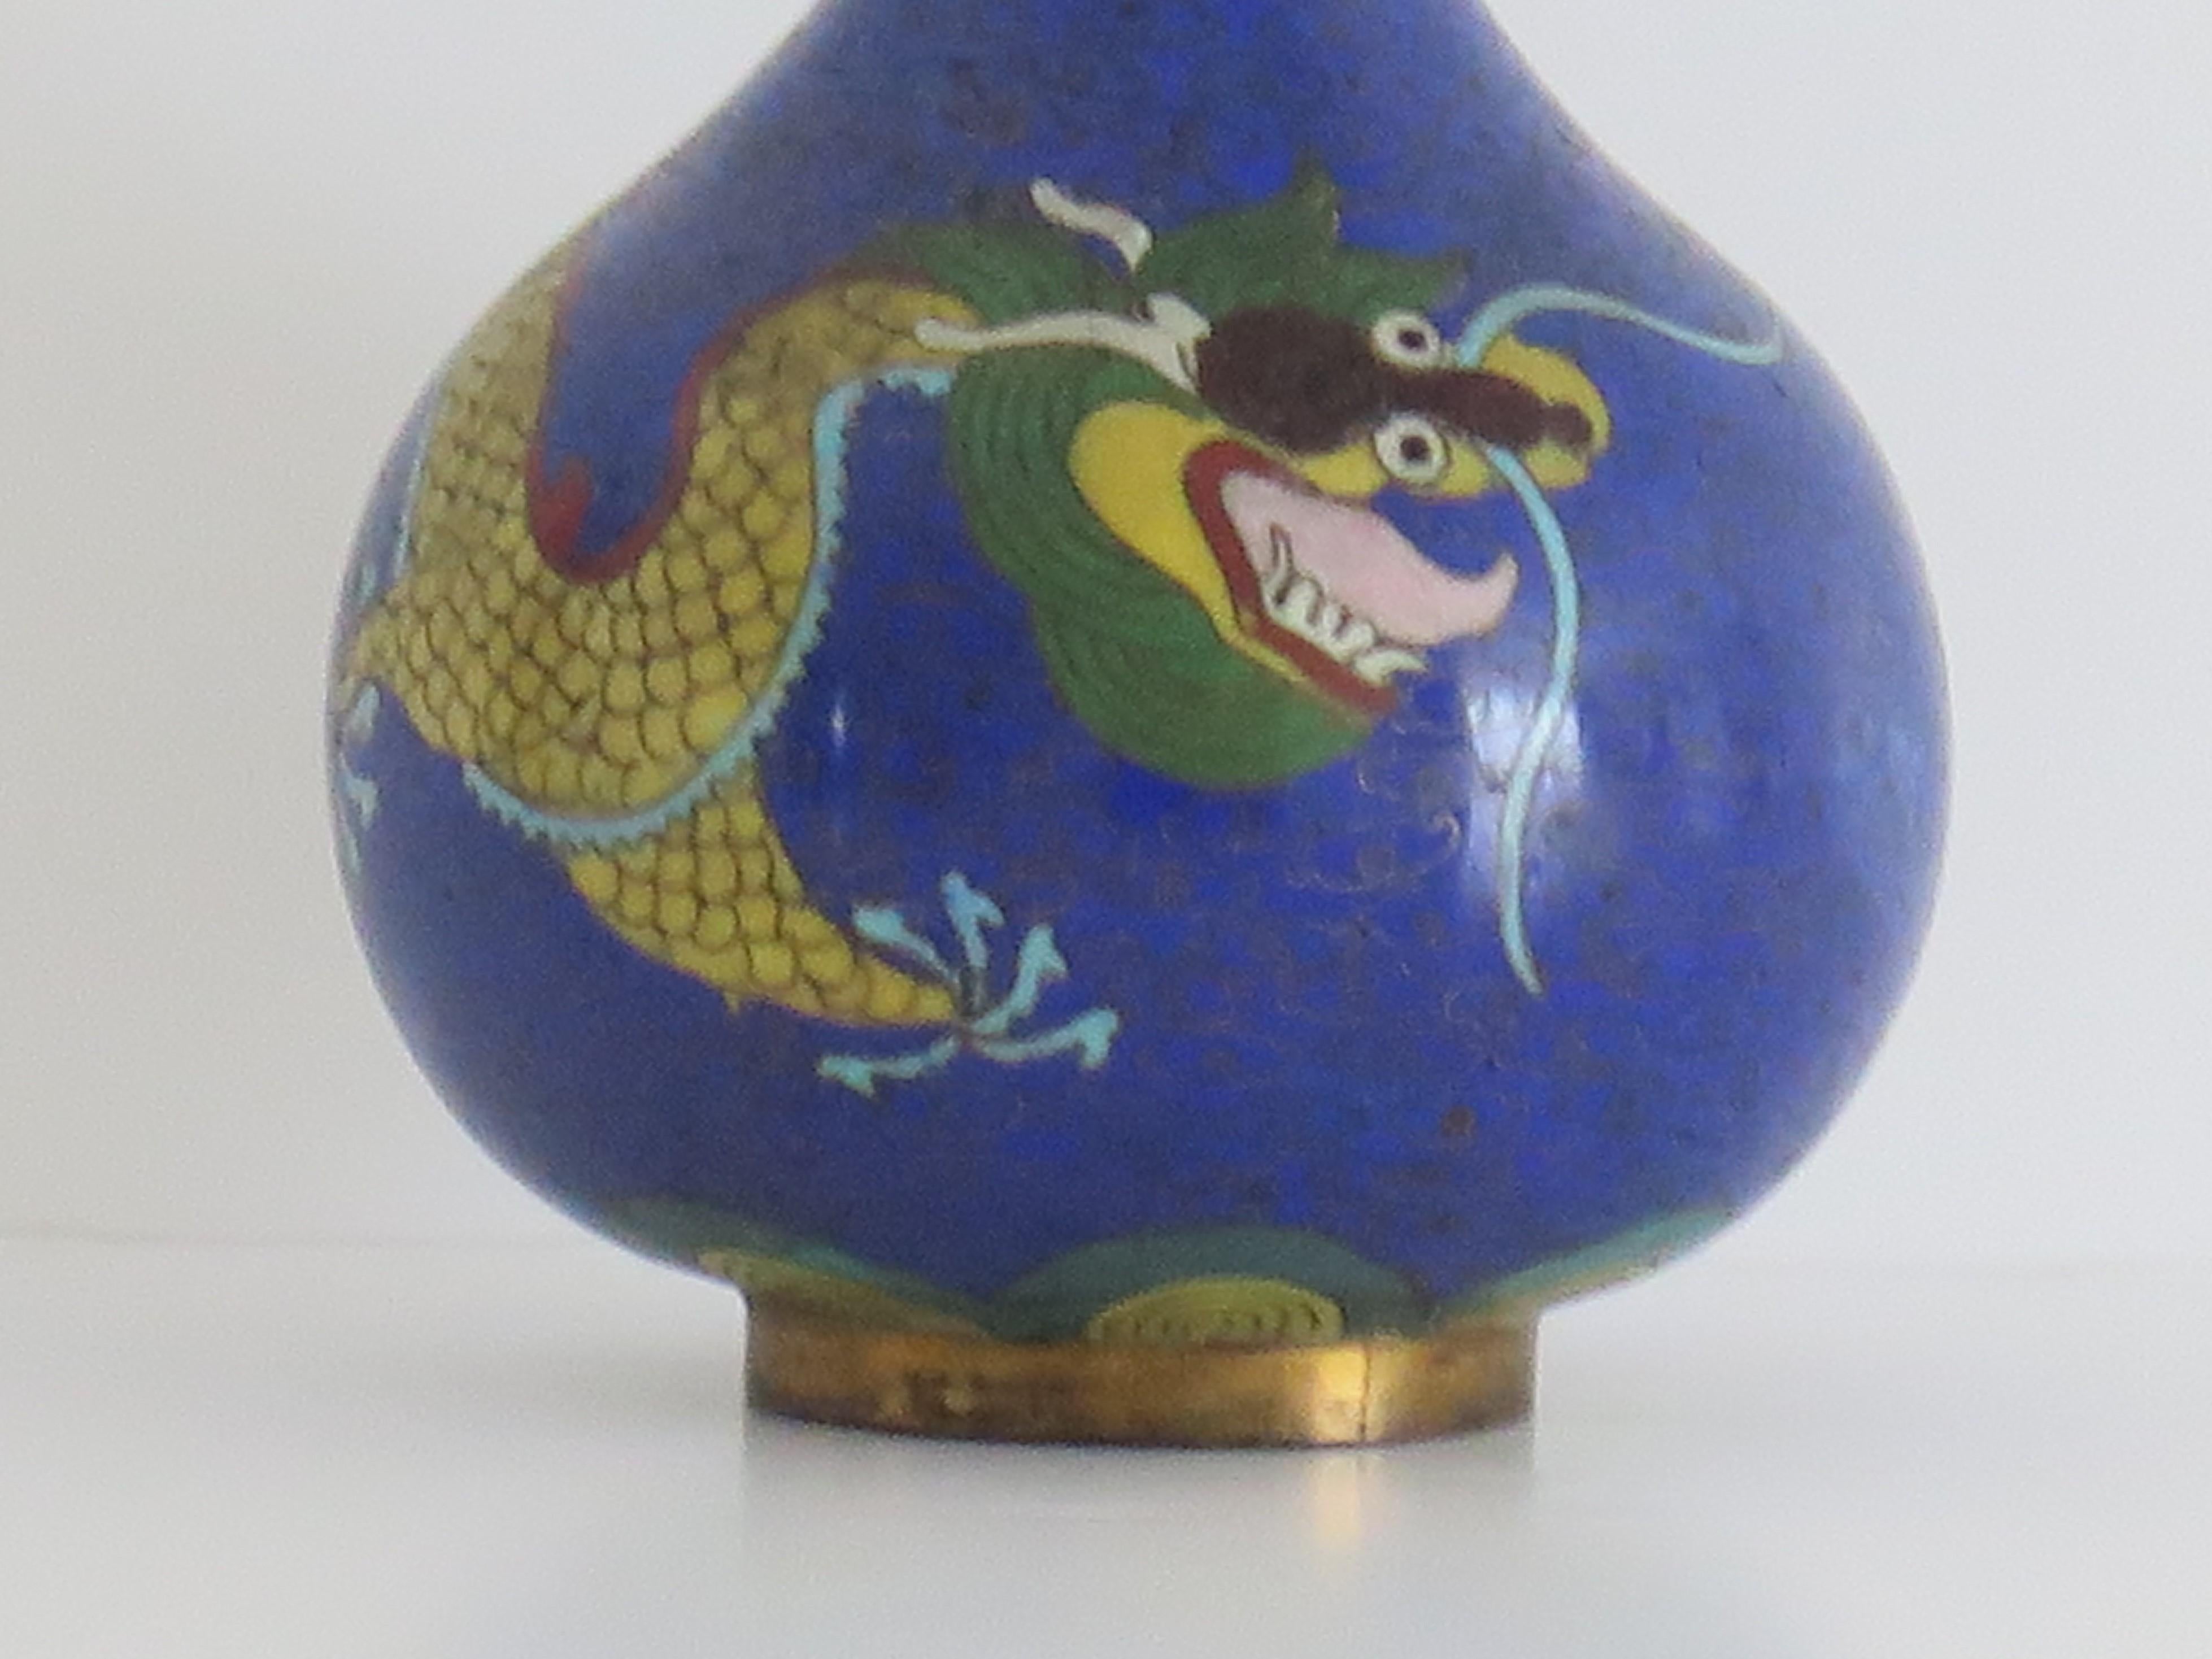 This is a very decorative small cloisonné vase, made in China and dating to the second half of the 19th Century, Qing period. 

The vase has a good globular baluster shape. It has been well made of a bronze alloy with rich enamels of many